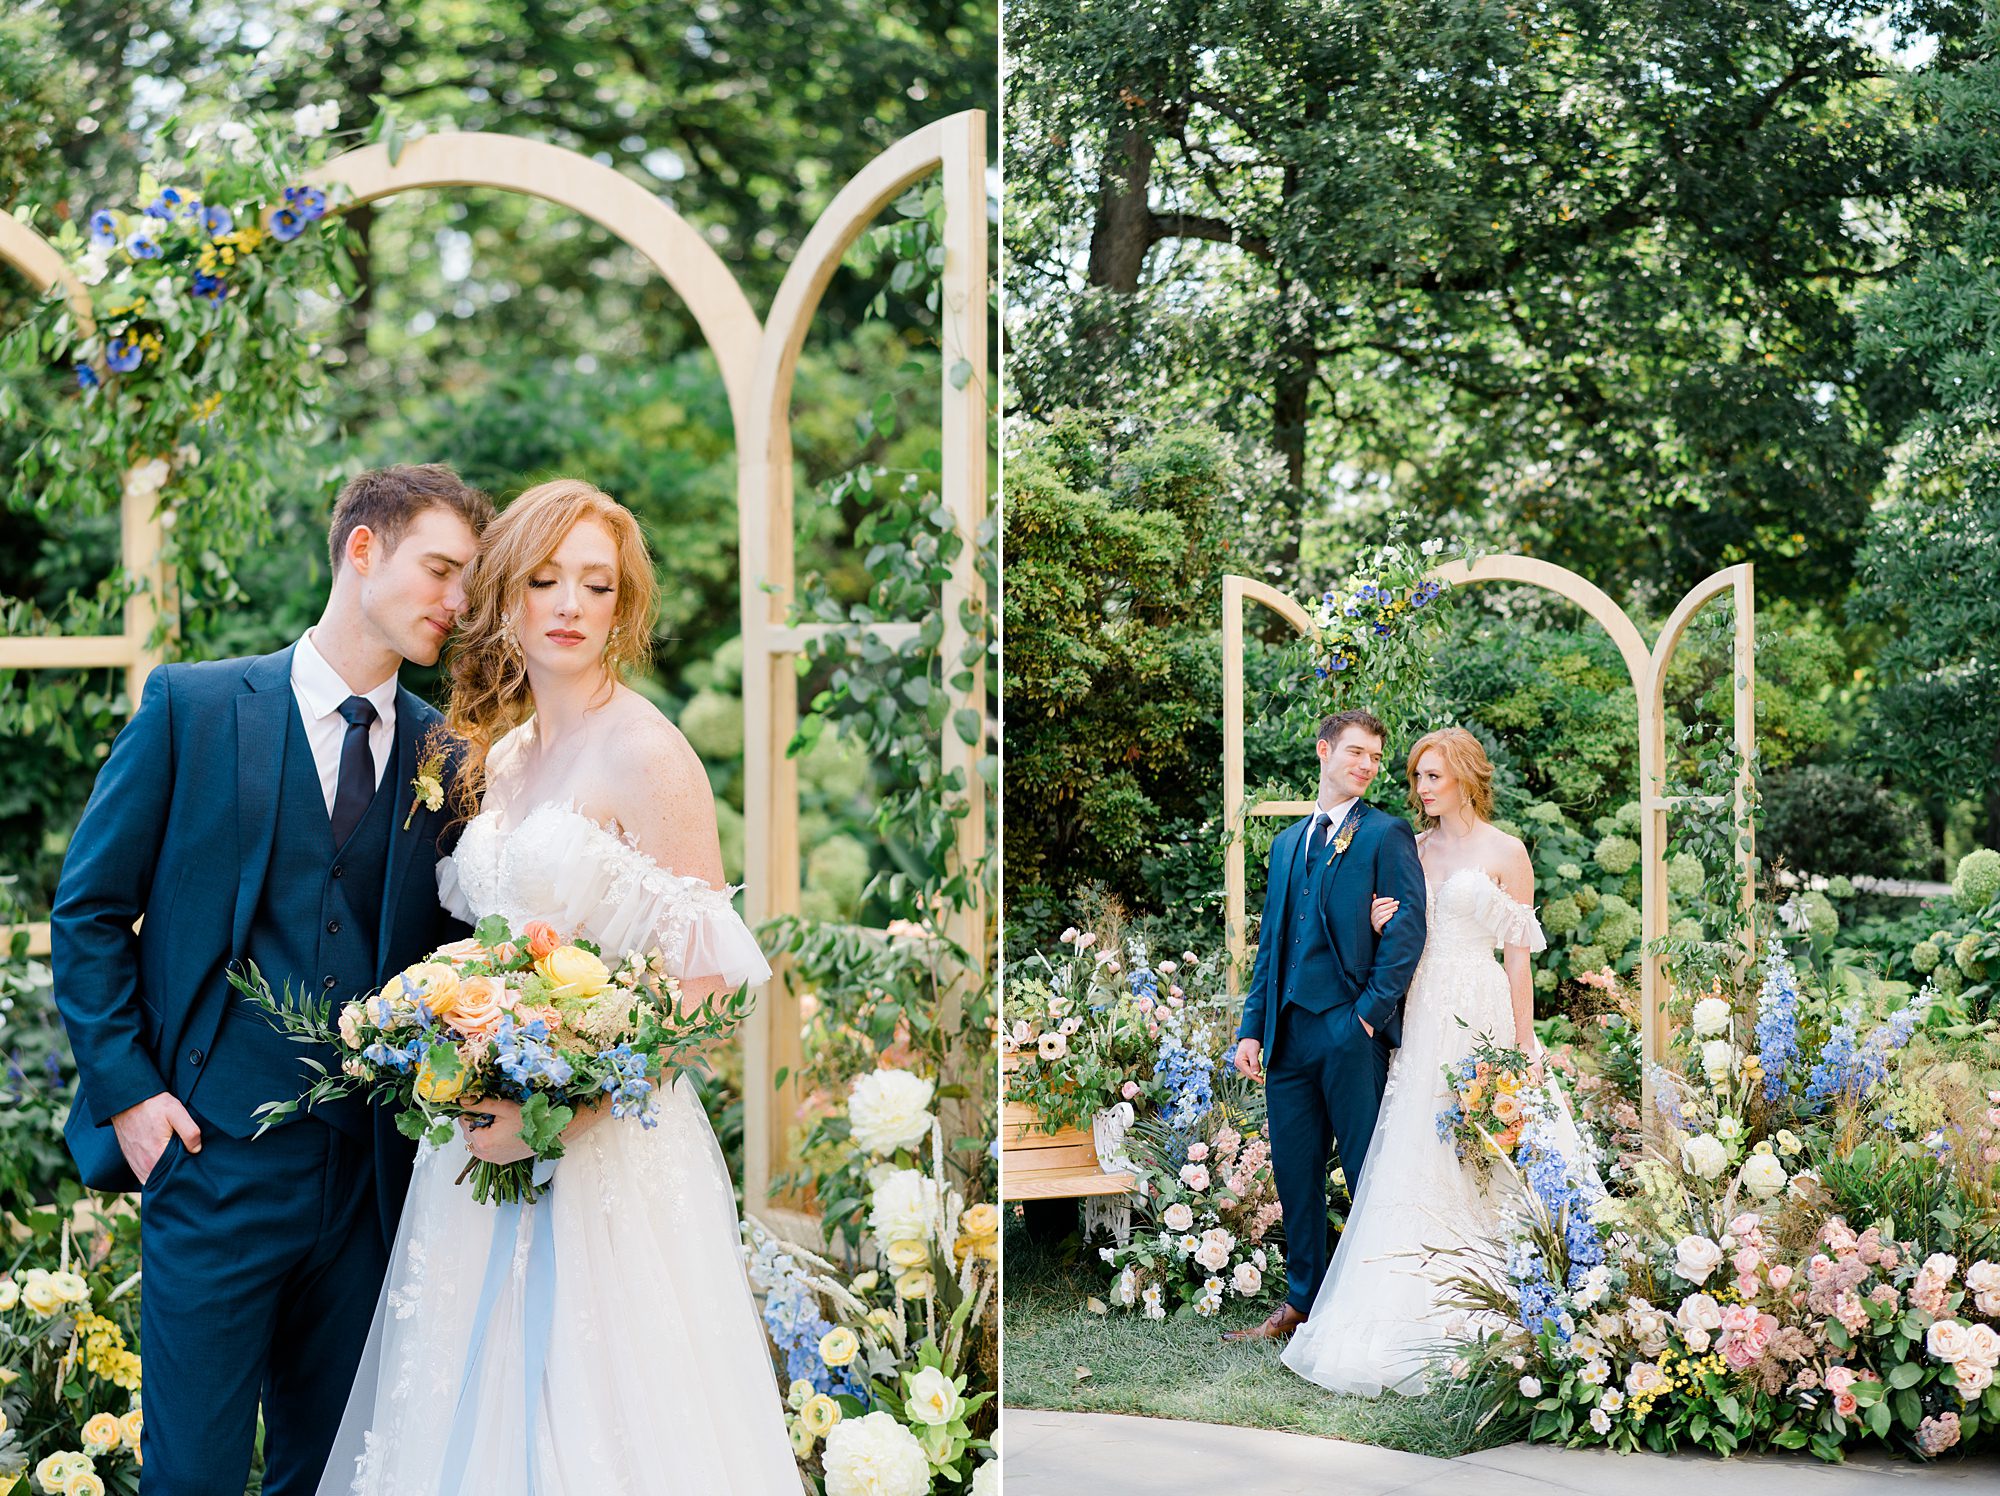 Styled wedding at Cairnwood Estate in PA